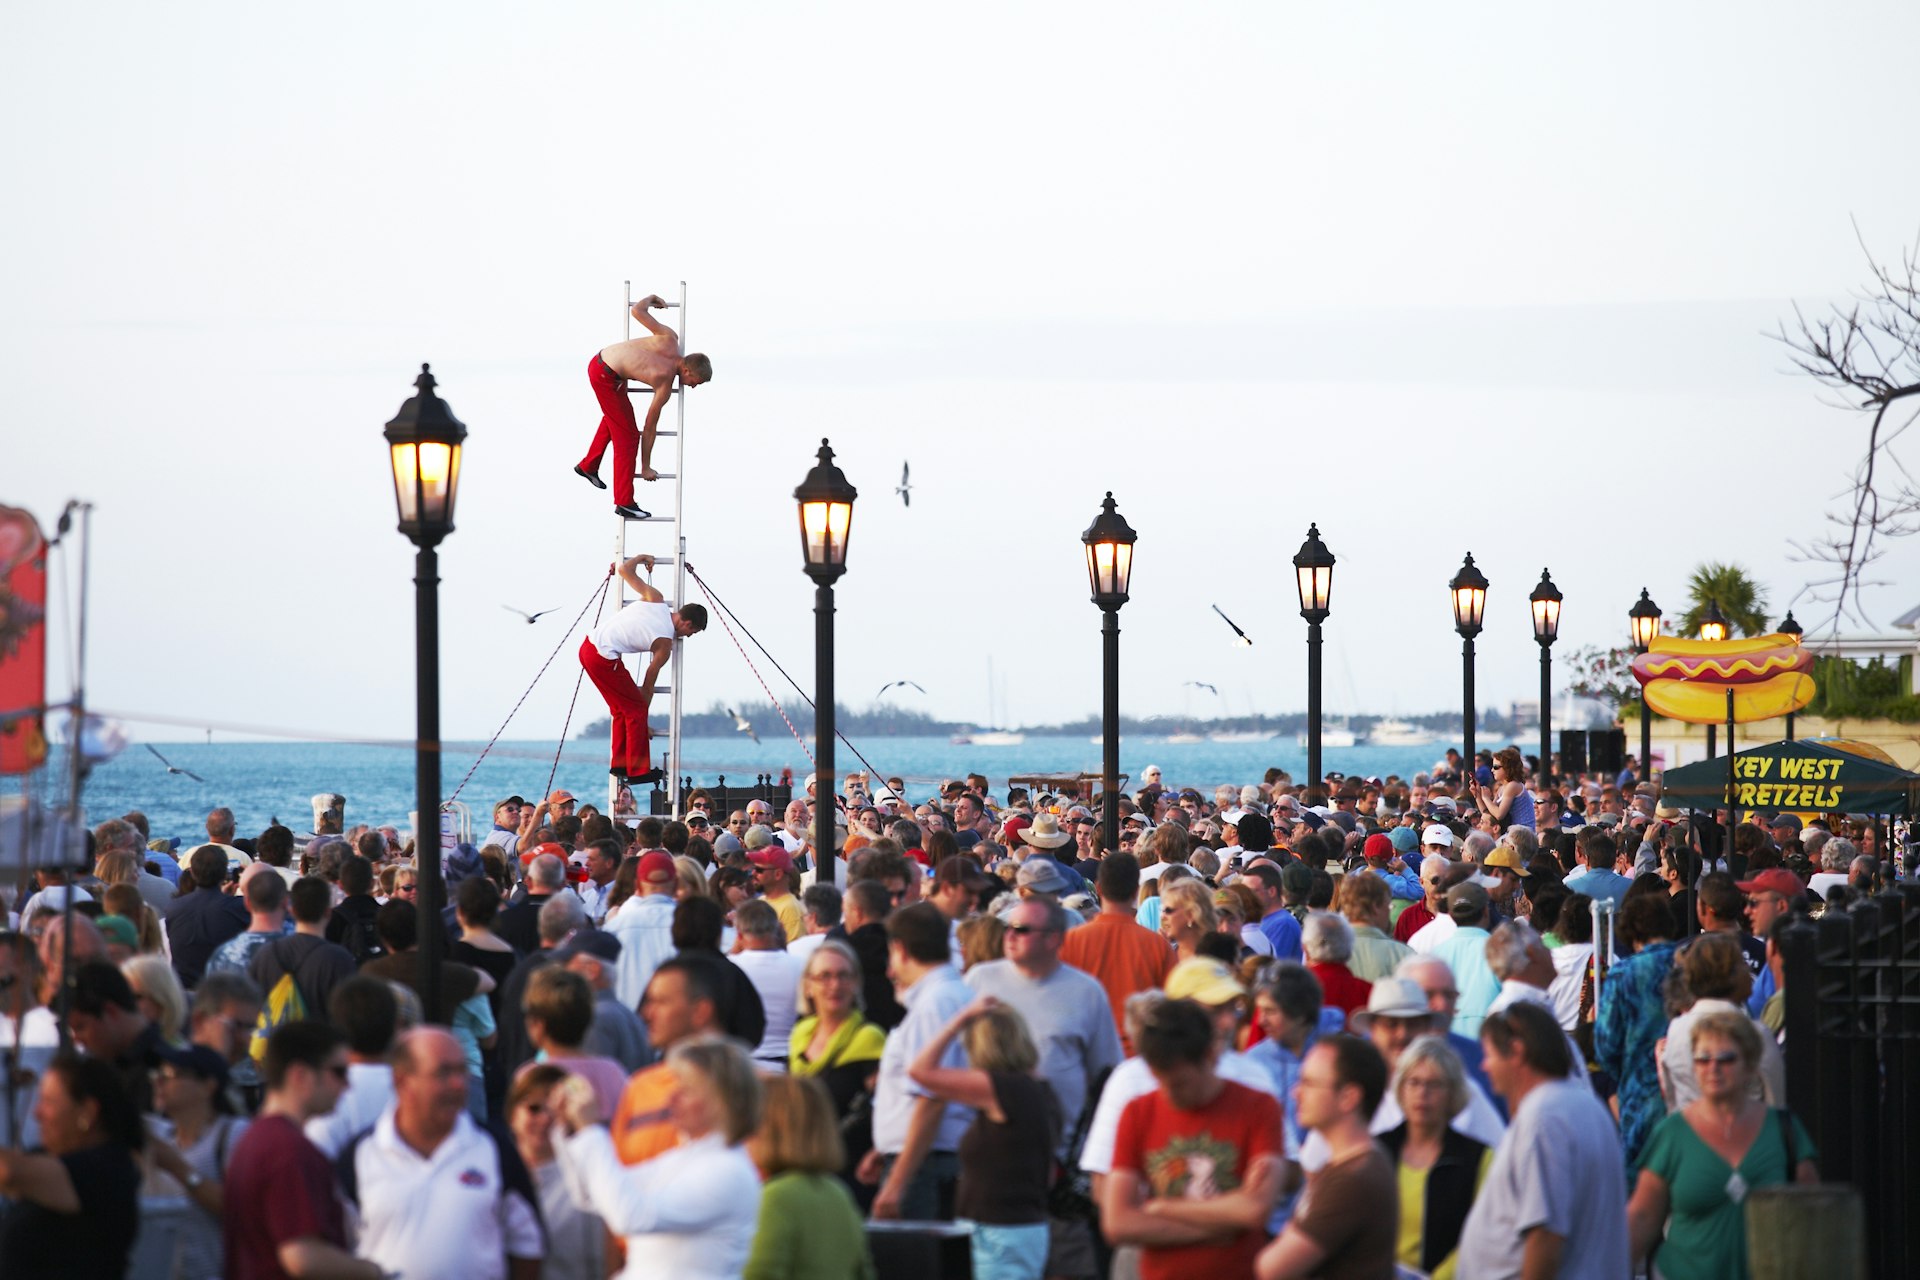 A crowd on an ocean promenade with street performers balanced on a ladder